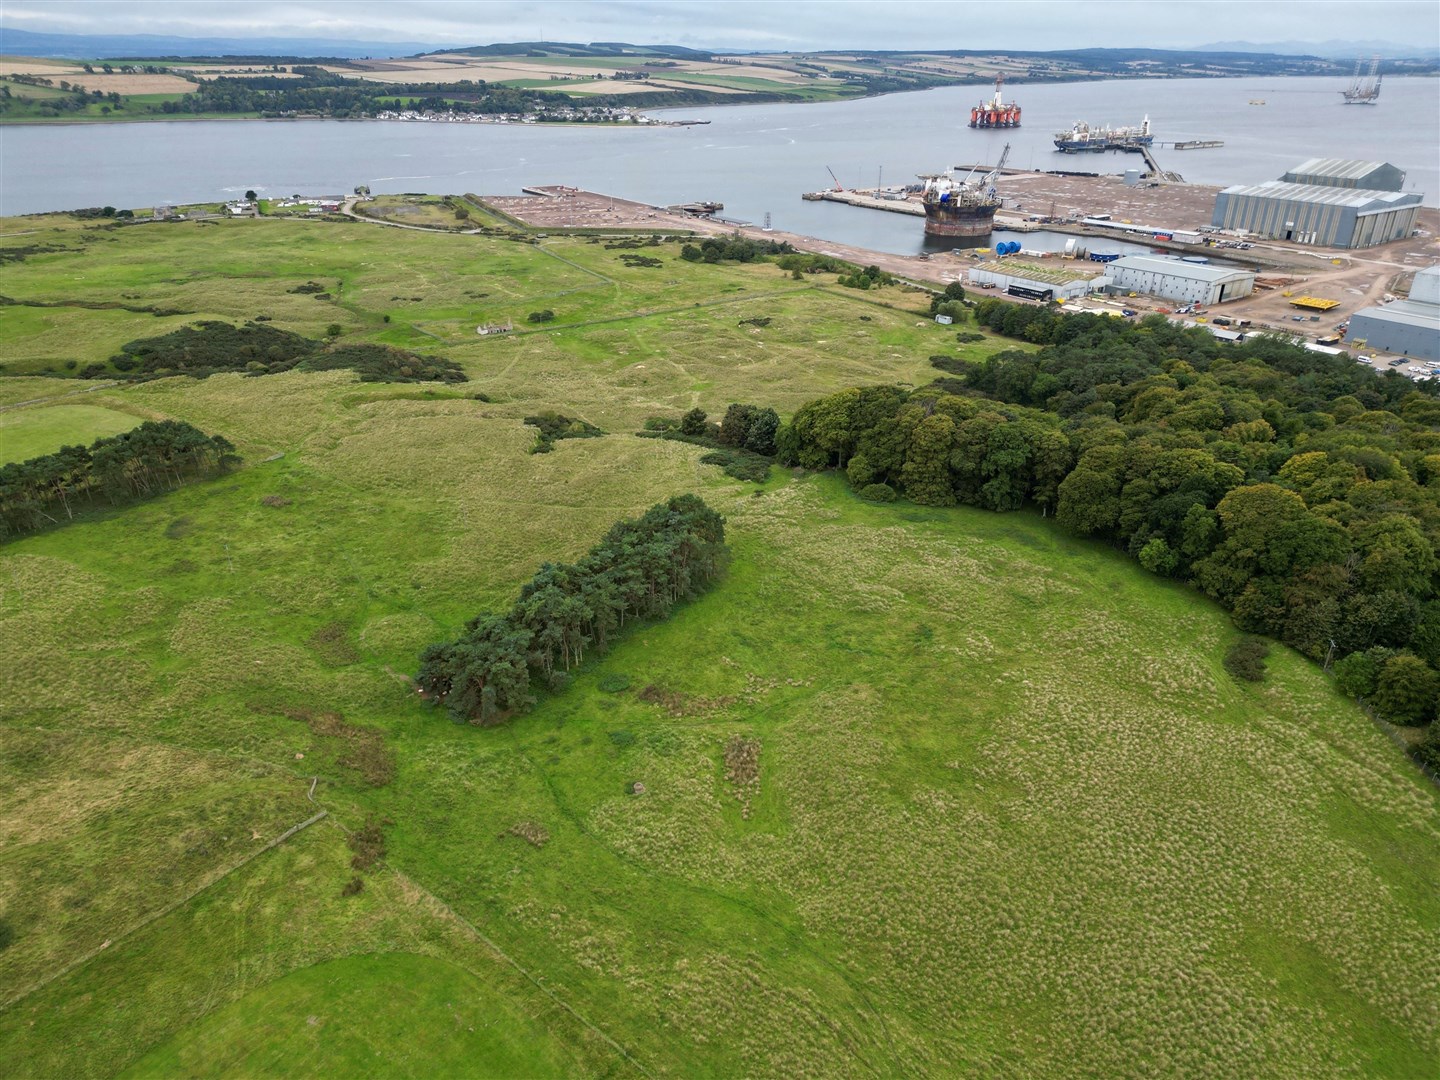 An aerial shot of the Nigg area supplied by Associated British Ports along with its announcement.